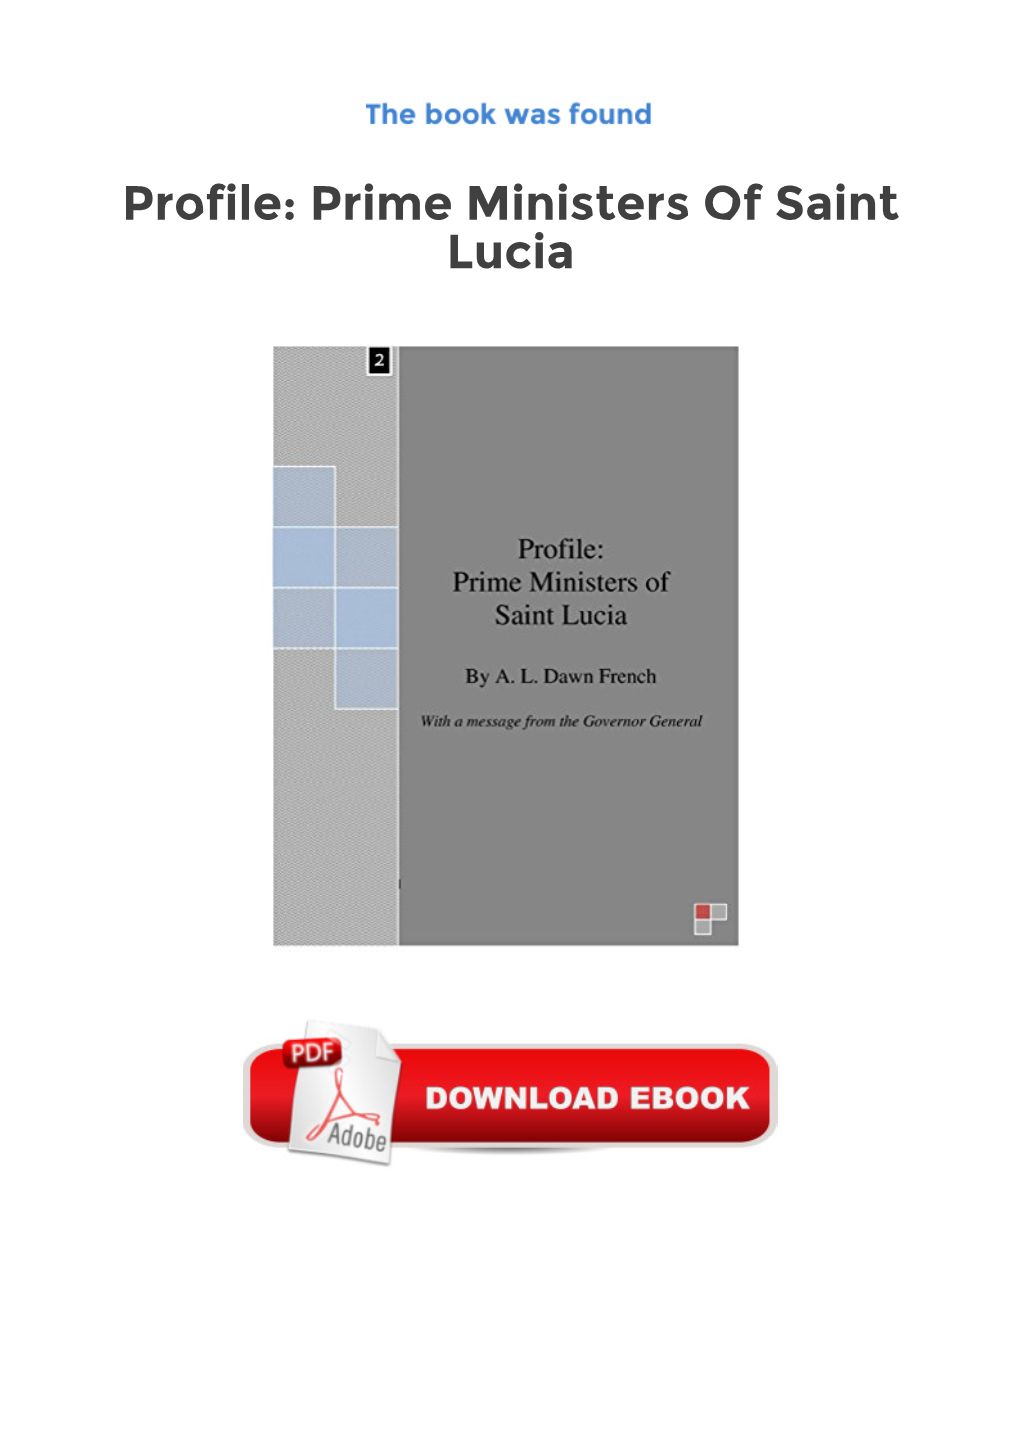 Free Downloads Profile: Prime Ministers of Saint Lucia